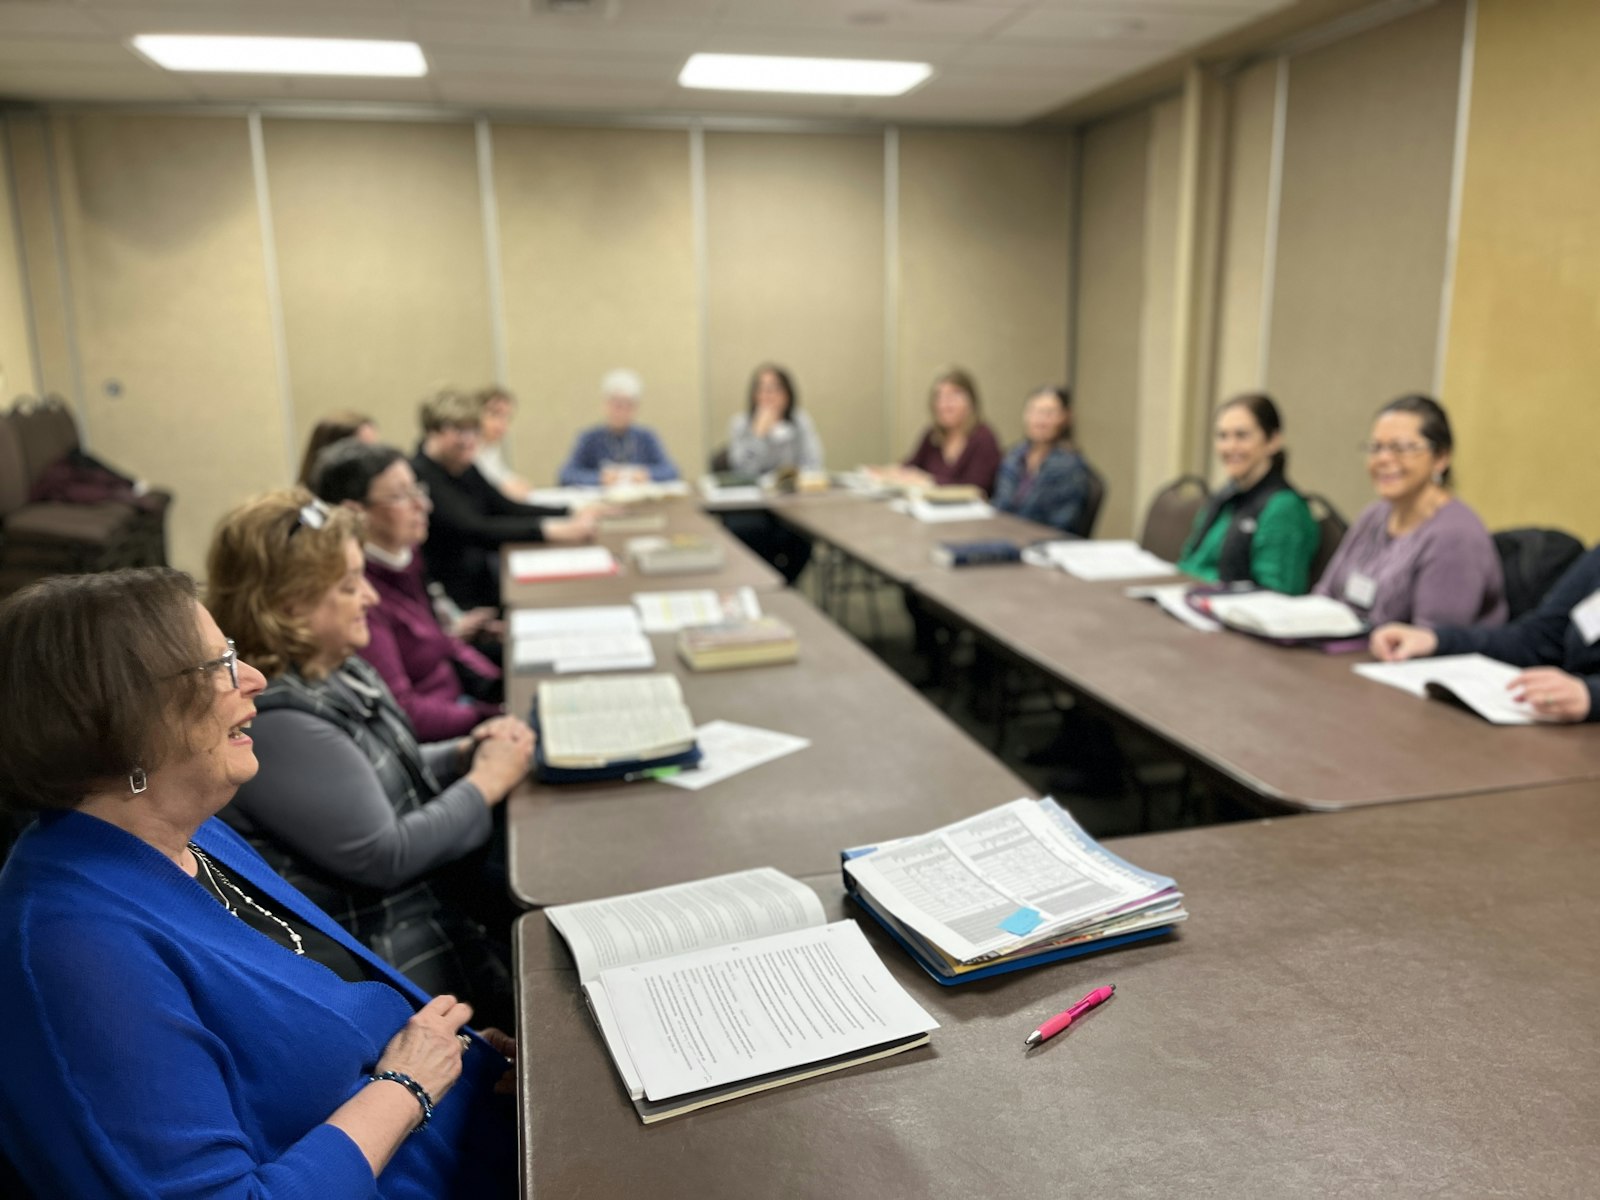 Sue Middlemis, left, leads a small group discussion during the Women's Catholic Bible Study group at St. John Neumann Parish this spring. Middlemis admitted she was skeptical at first that she could pull it off, but adds it's been one of the best decisions of her life.